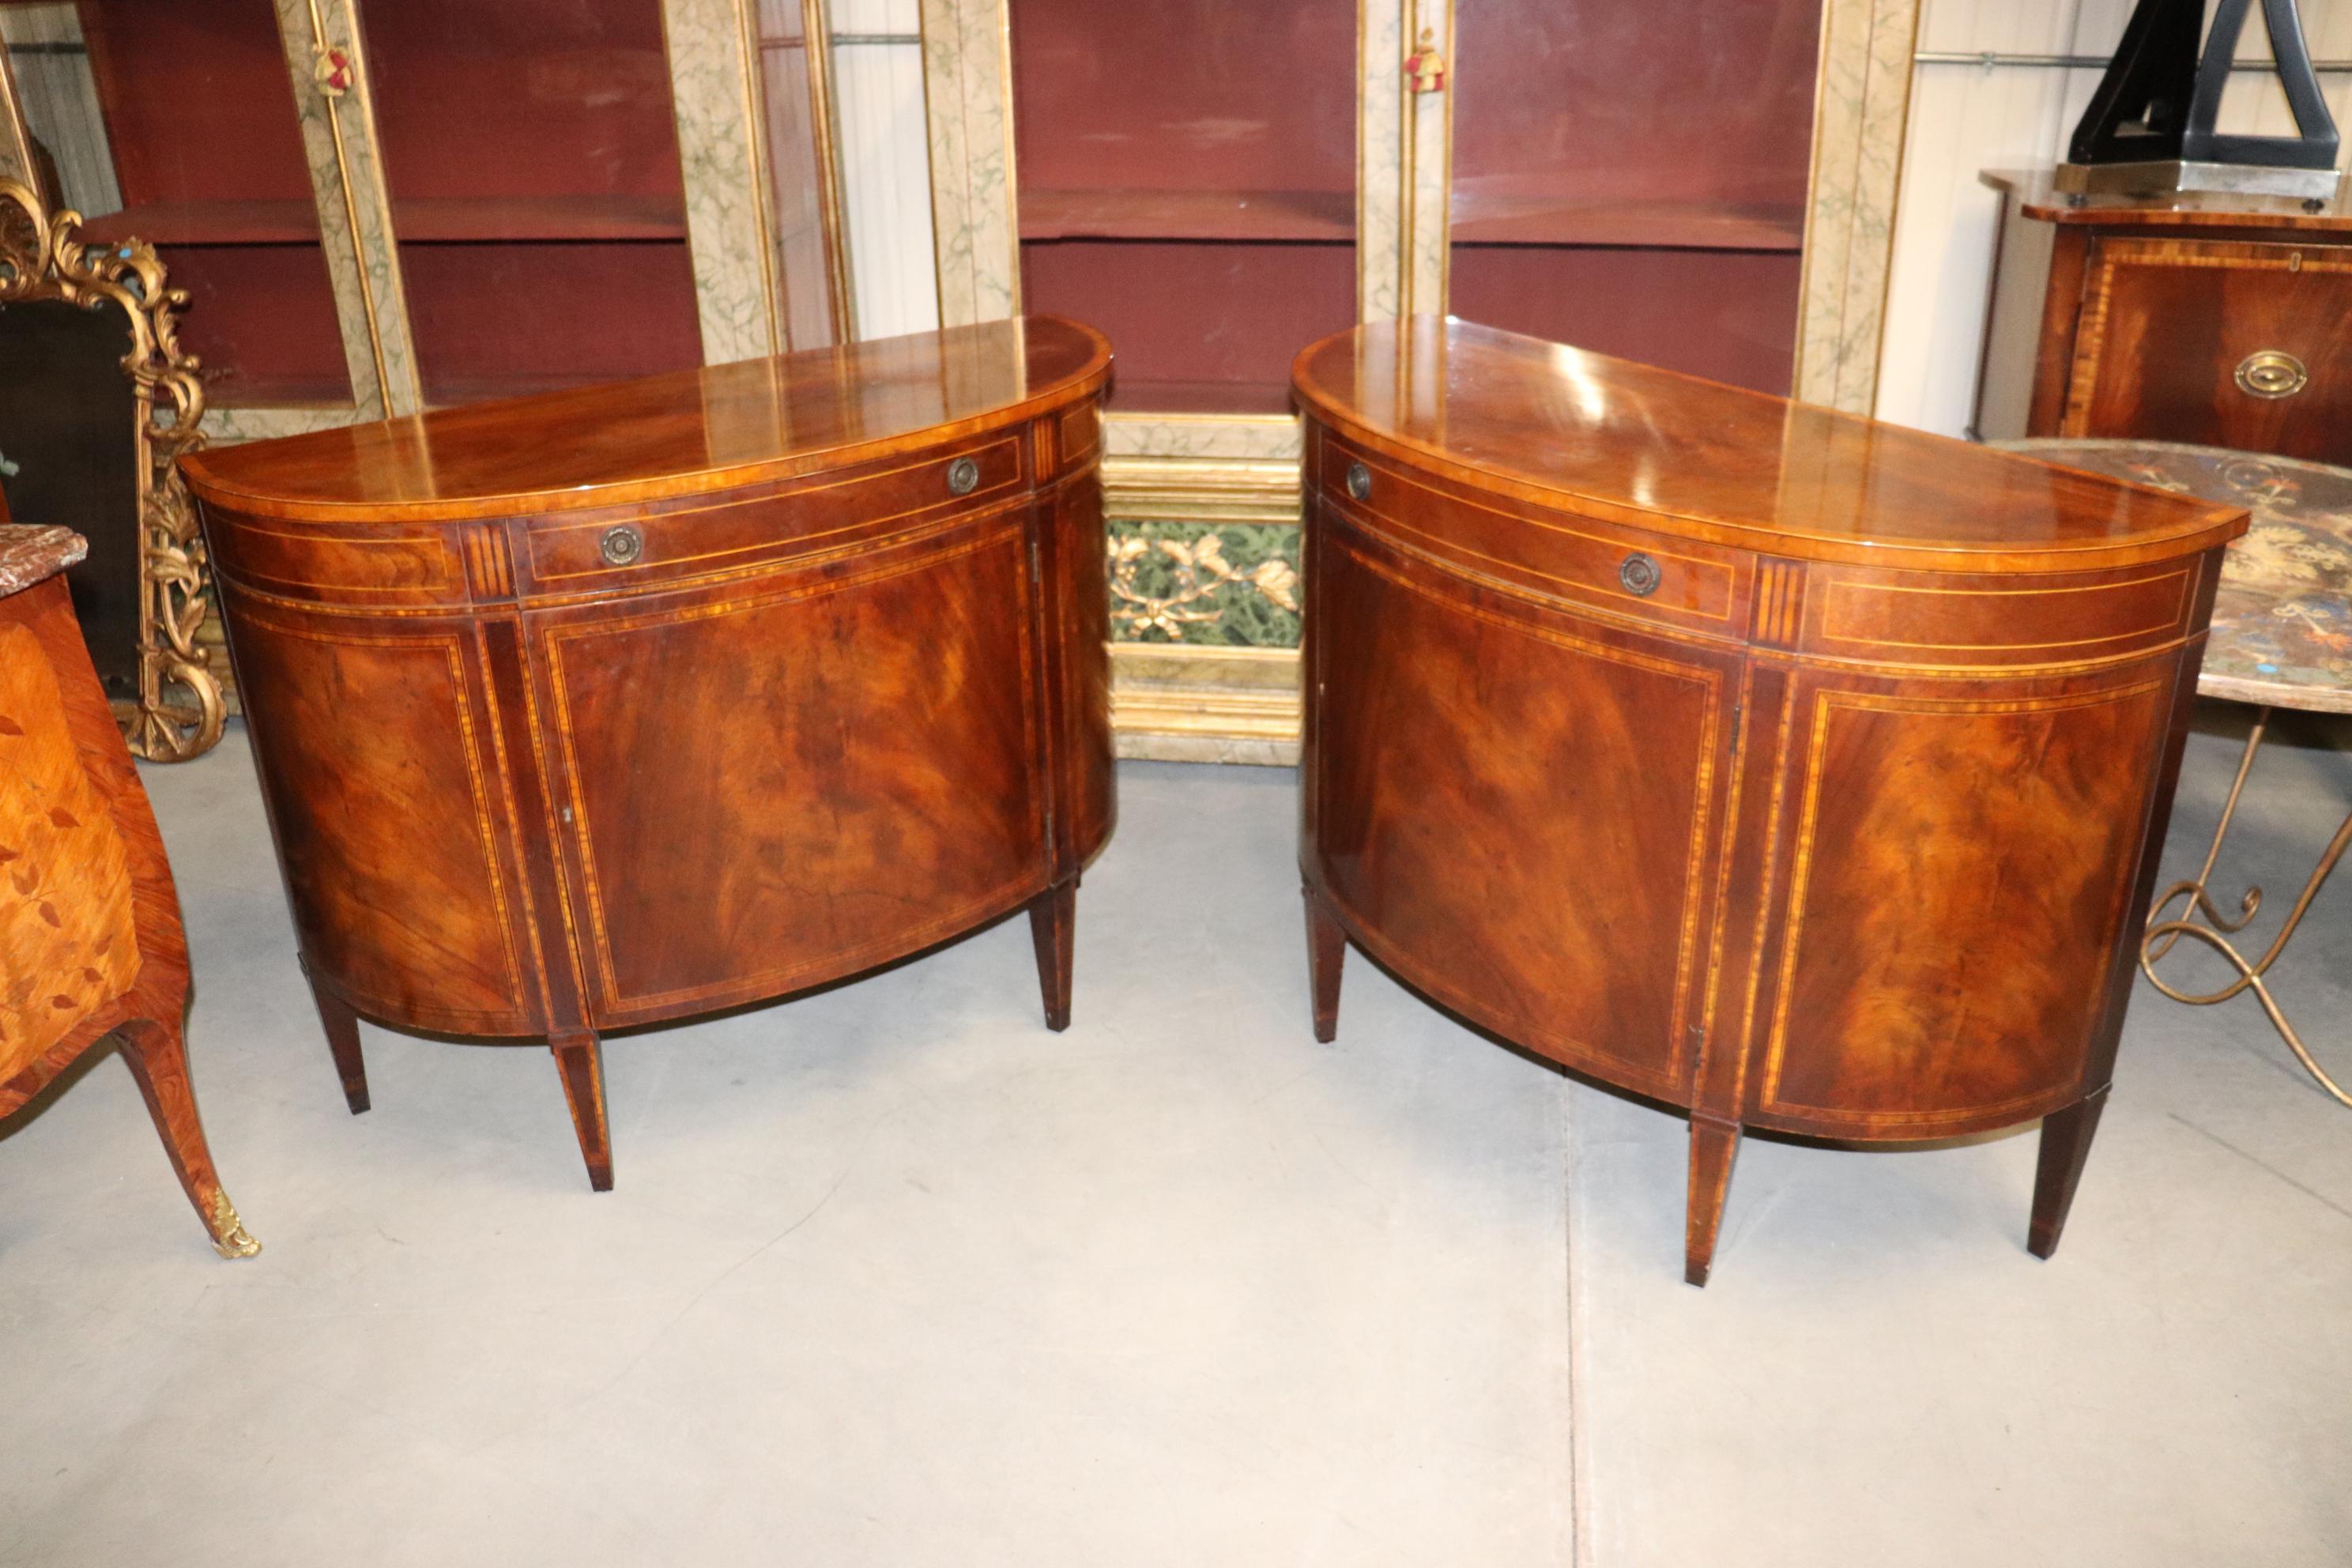 This is a superb pair of flame mahogany buffets designed in the Sheraton style and done with outrageous flame mahogany. The wood quality is absolutely incredible. The condition is very good for their age and while one buffet does have some very